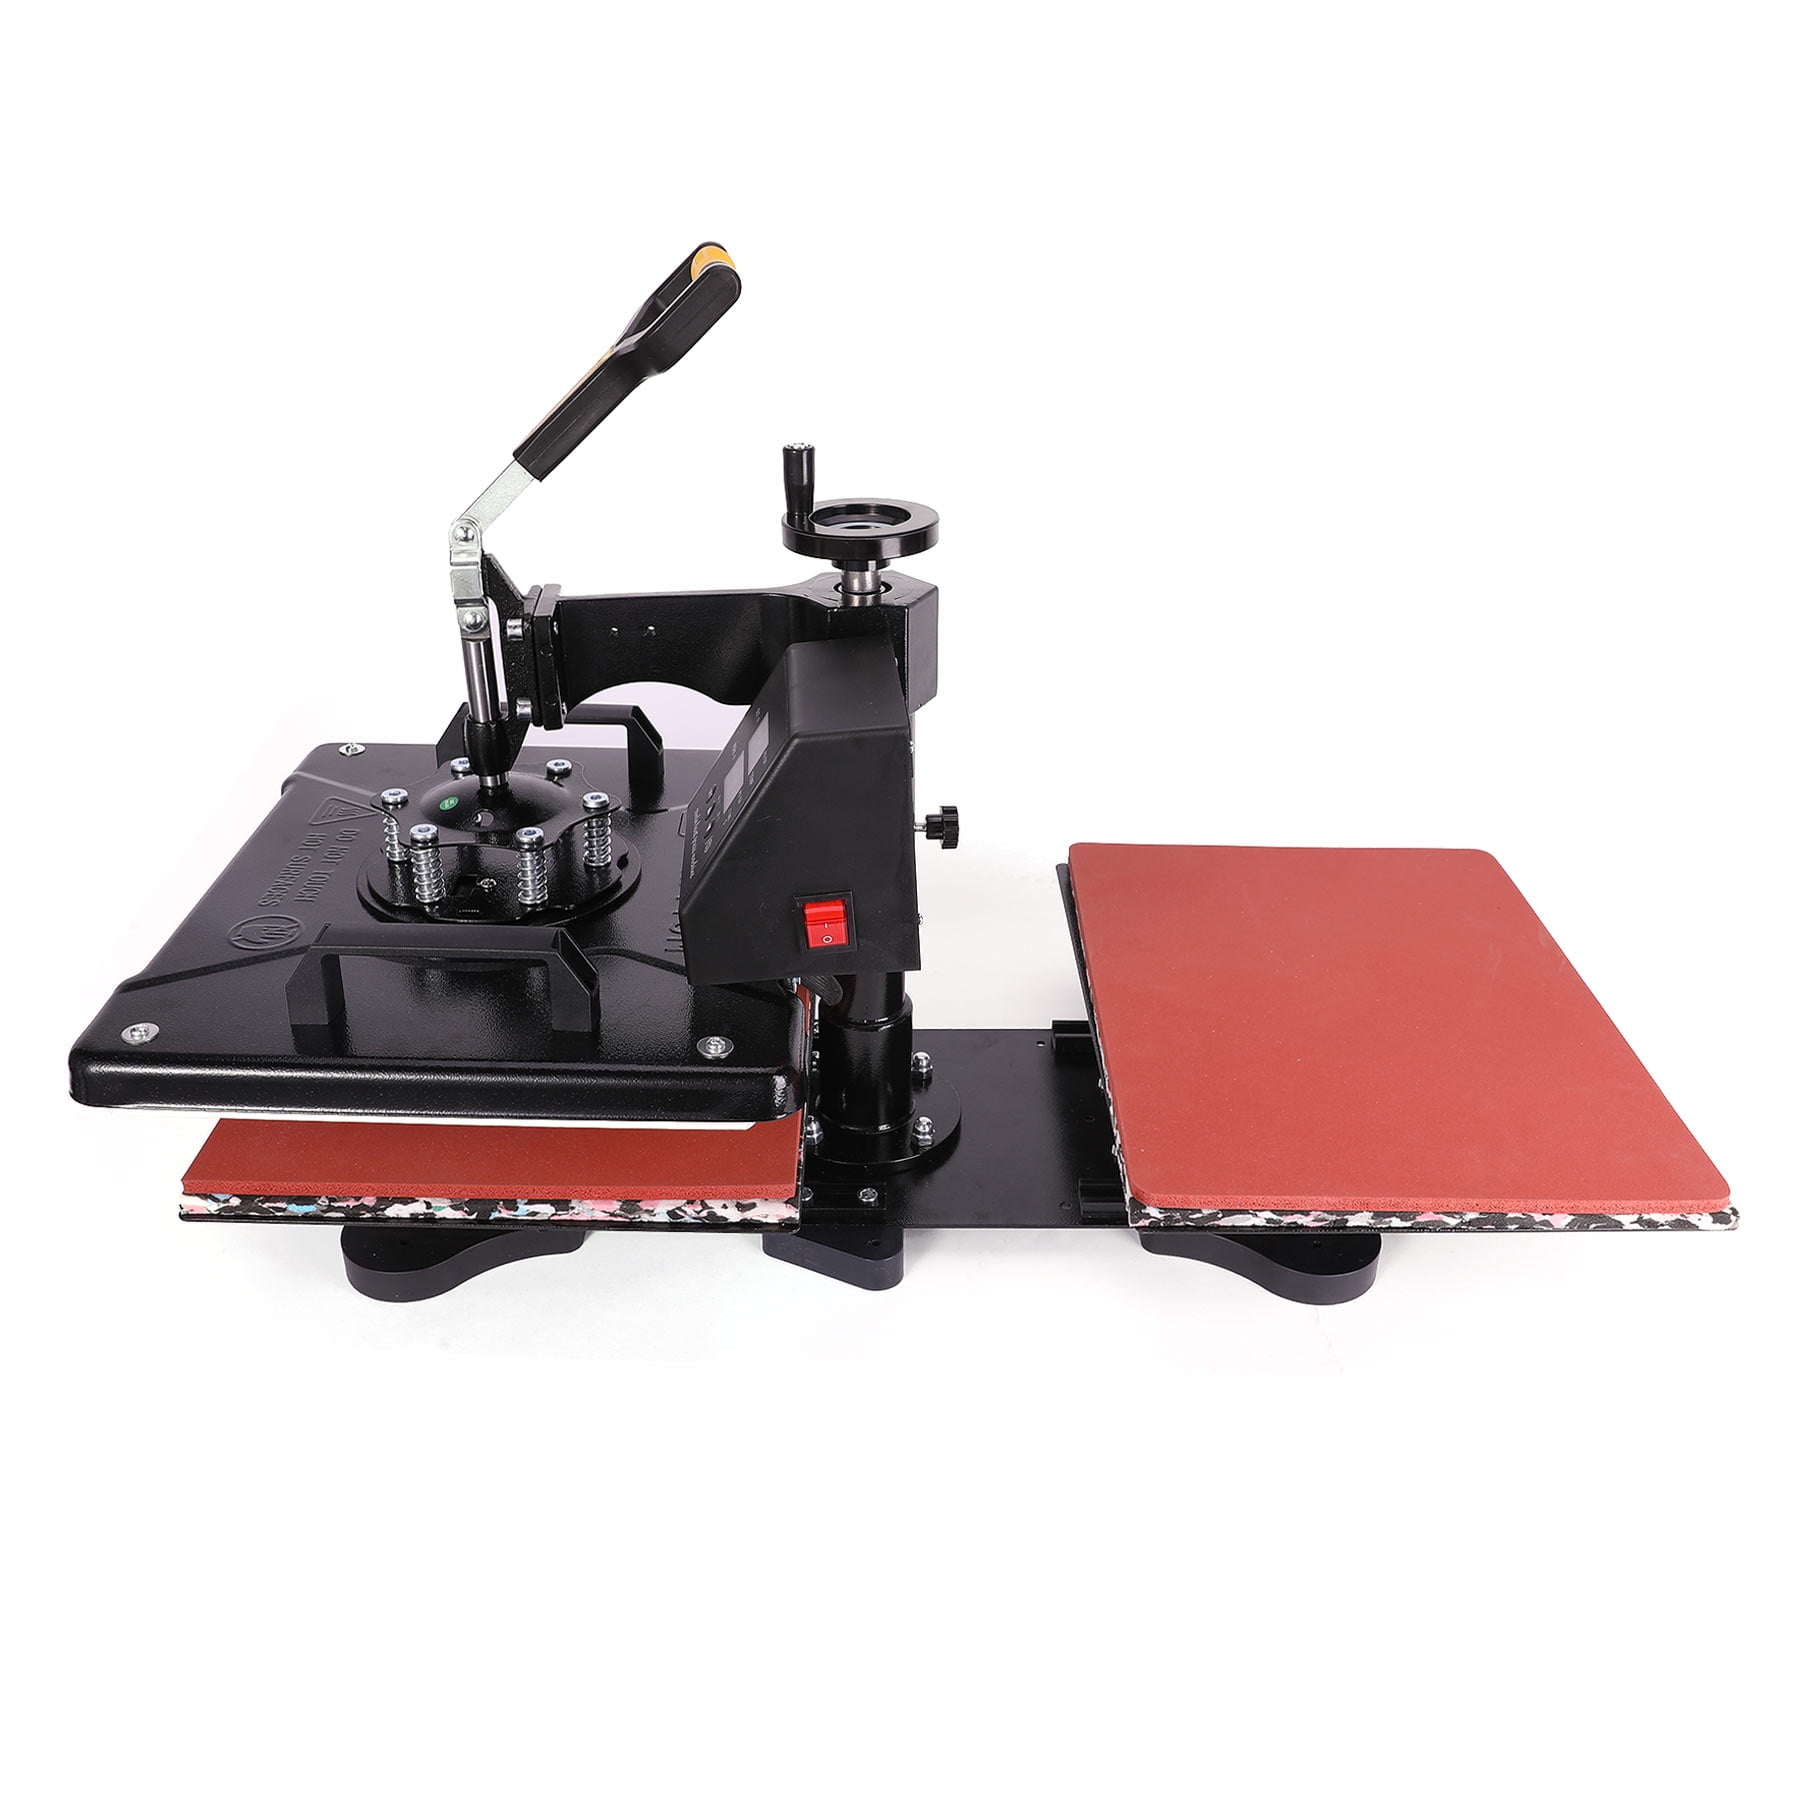 2018 New Generation Auto Open Double Working Station Printing Tshirt Heat  Press Machine For Textile Vinyl Plastic - Buy 2018 New Generation Auto Open  Double Working Station Printing Tshirt Heat Press Machine